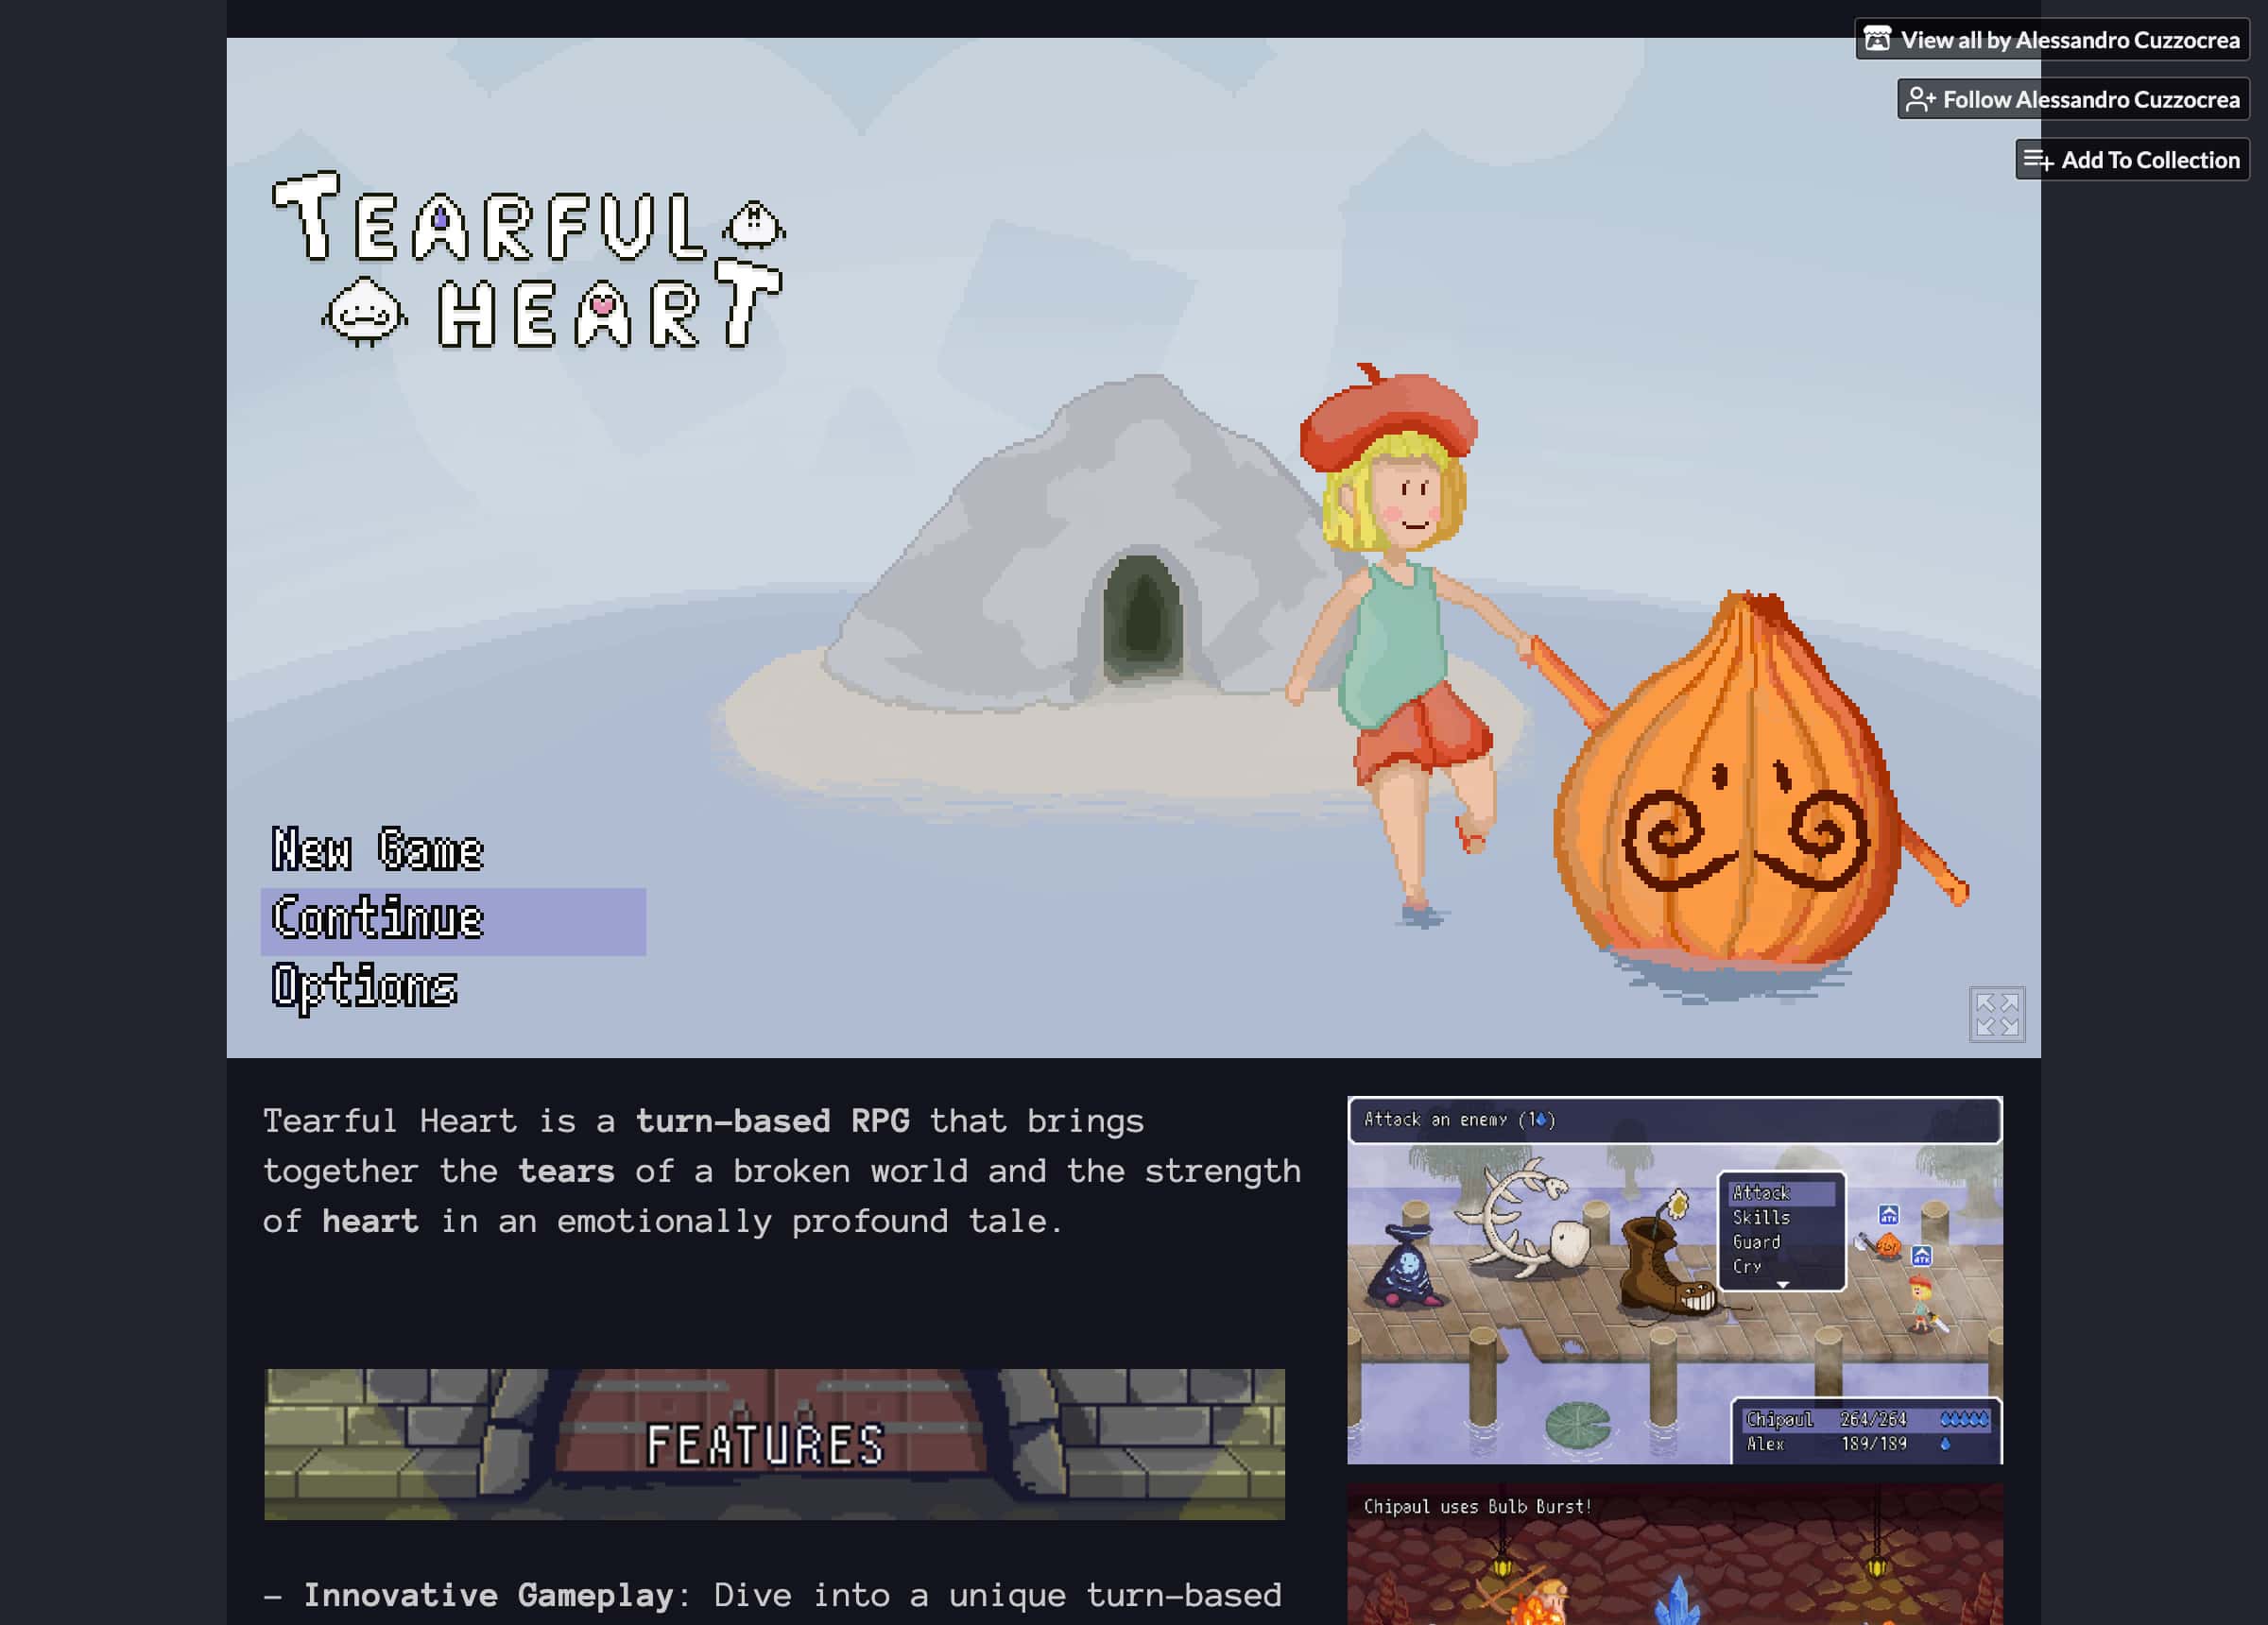 Screenshot of the Tearful Heart RPG game's Itch.io page, featuring a pixel art main menu and a brief description of the game as a turn-based RPG set in a heartfelt, emotional story